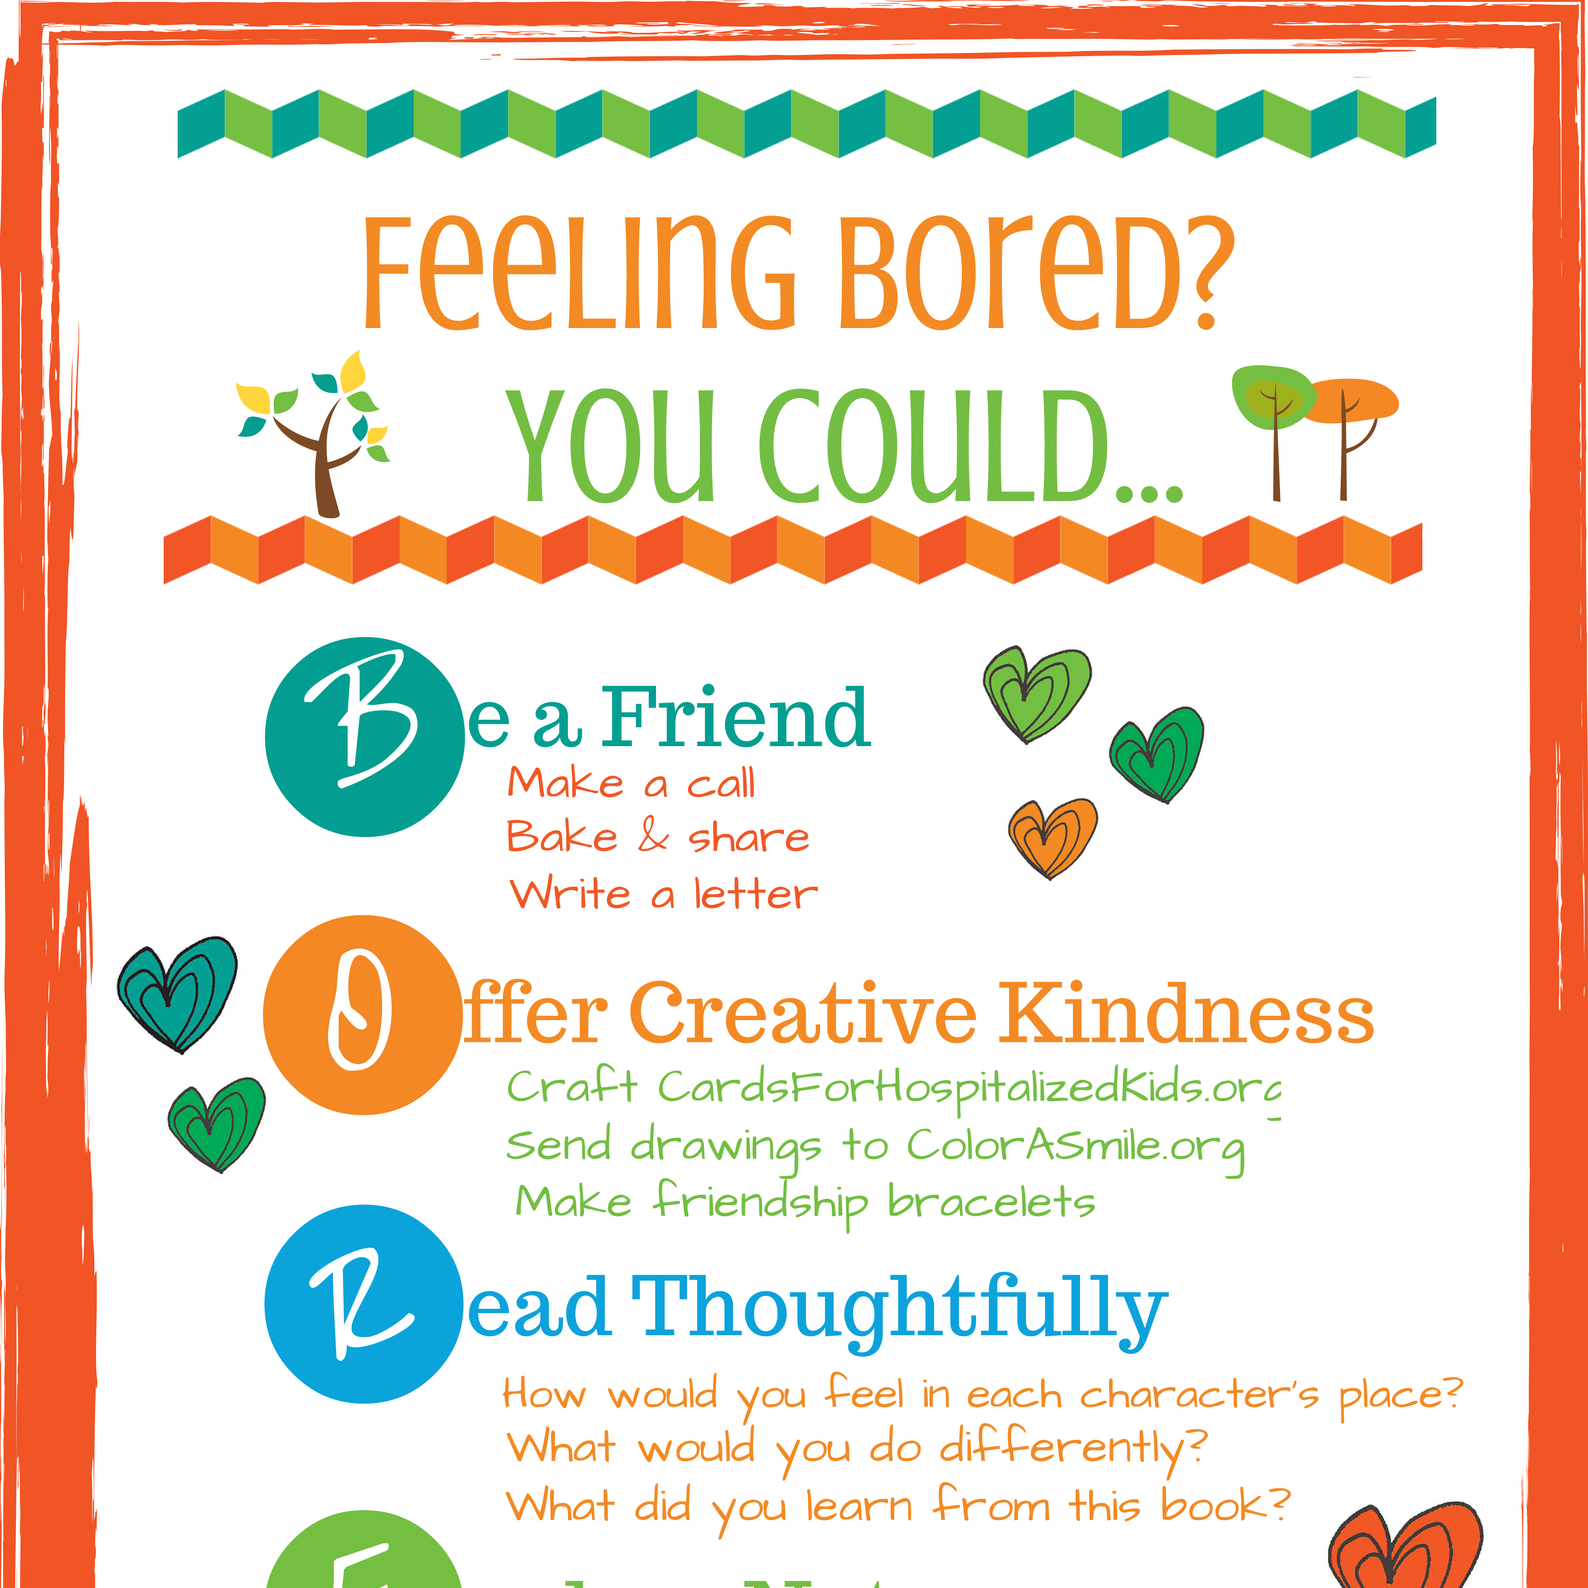 Big-Hearted Boredom Busters